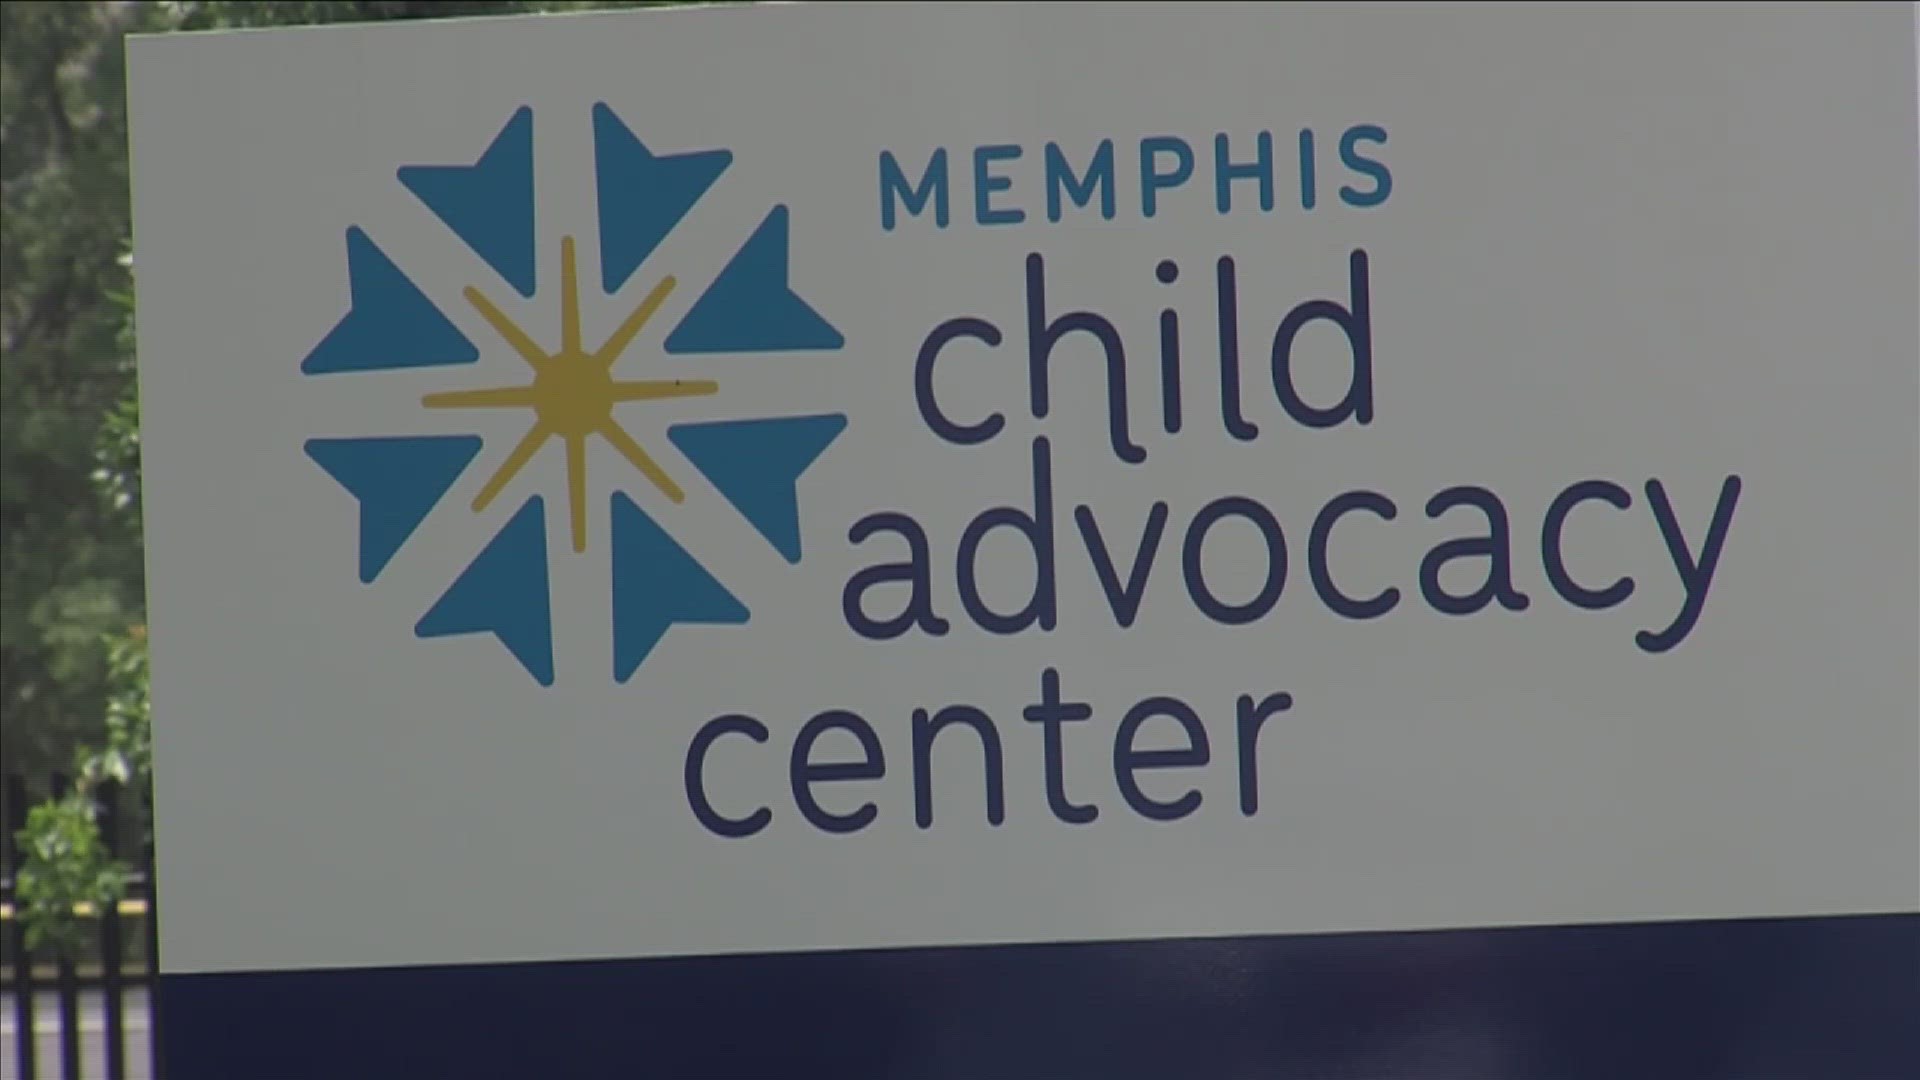 The Memphis Child Advocacy Center's goal is to create a network of adults to look out for the safety of children in all types of settings.